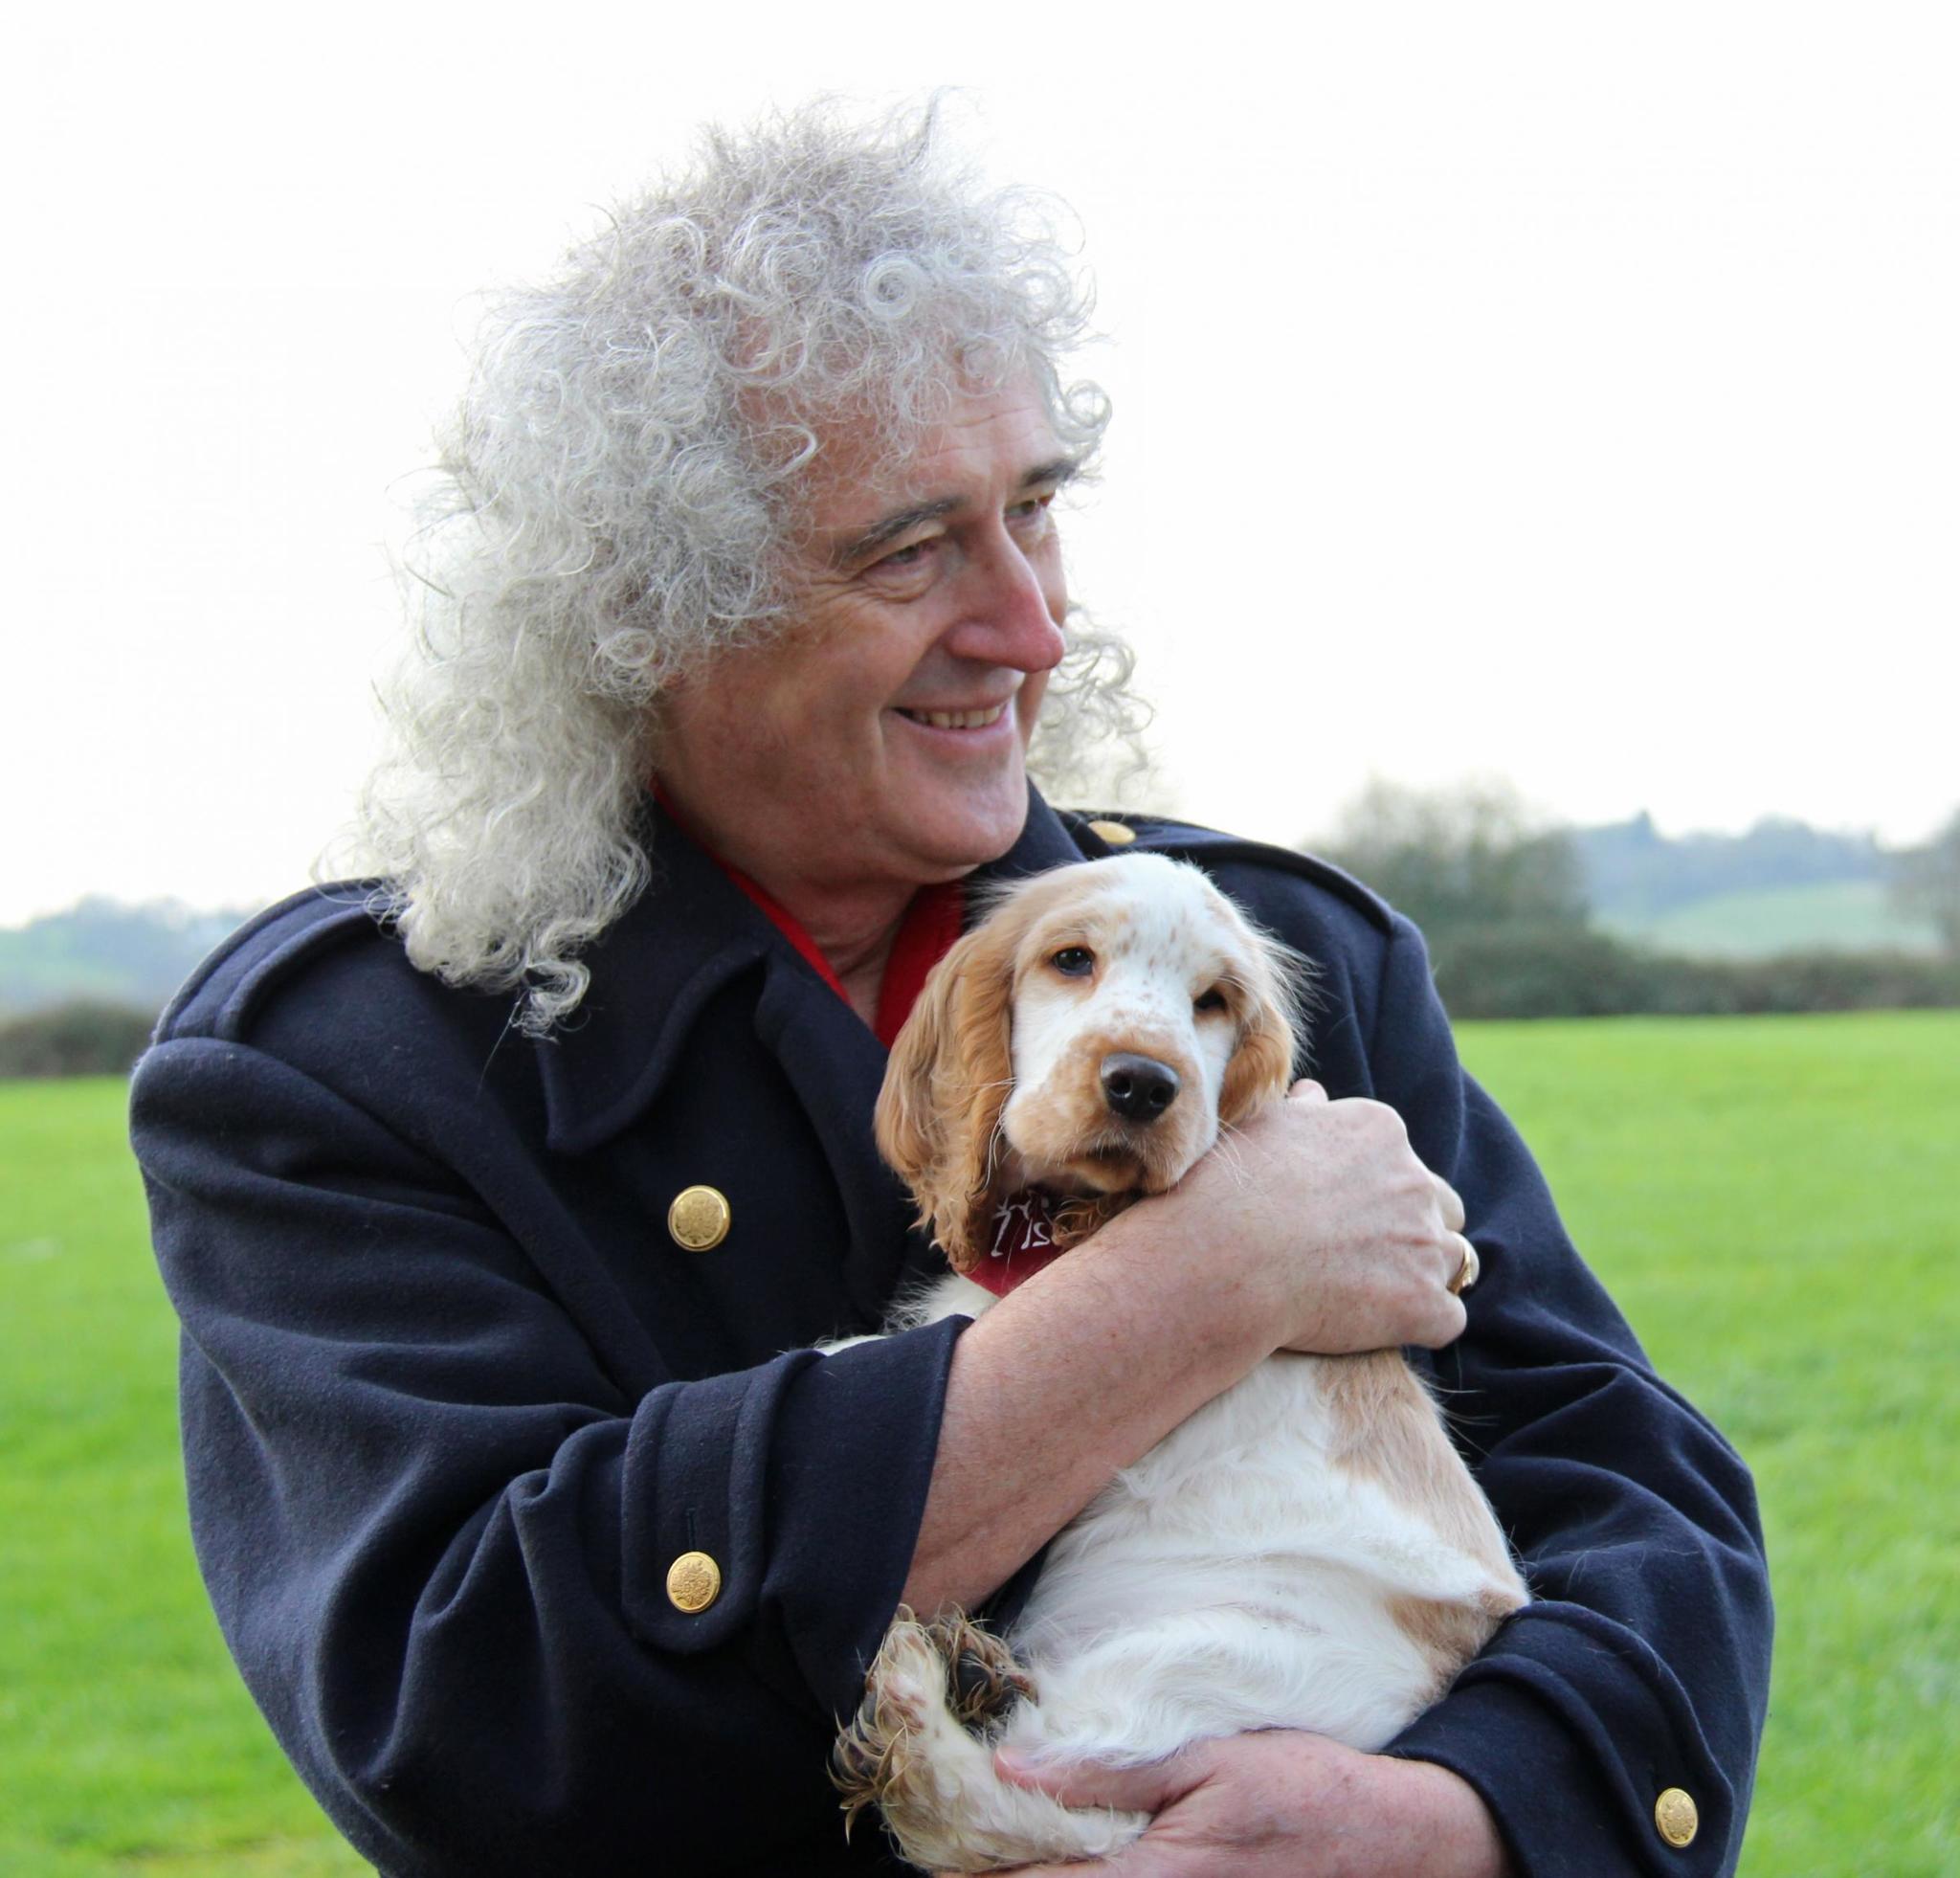 Brian May and Ralph, the 10-week-old Cocker Spaniel puppy